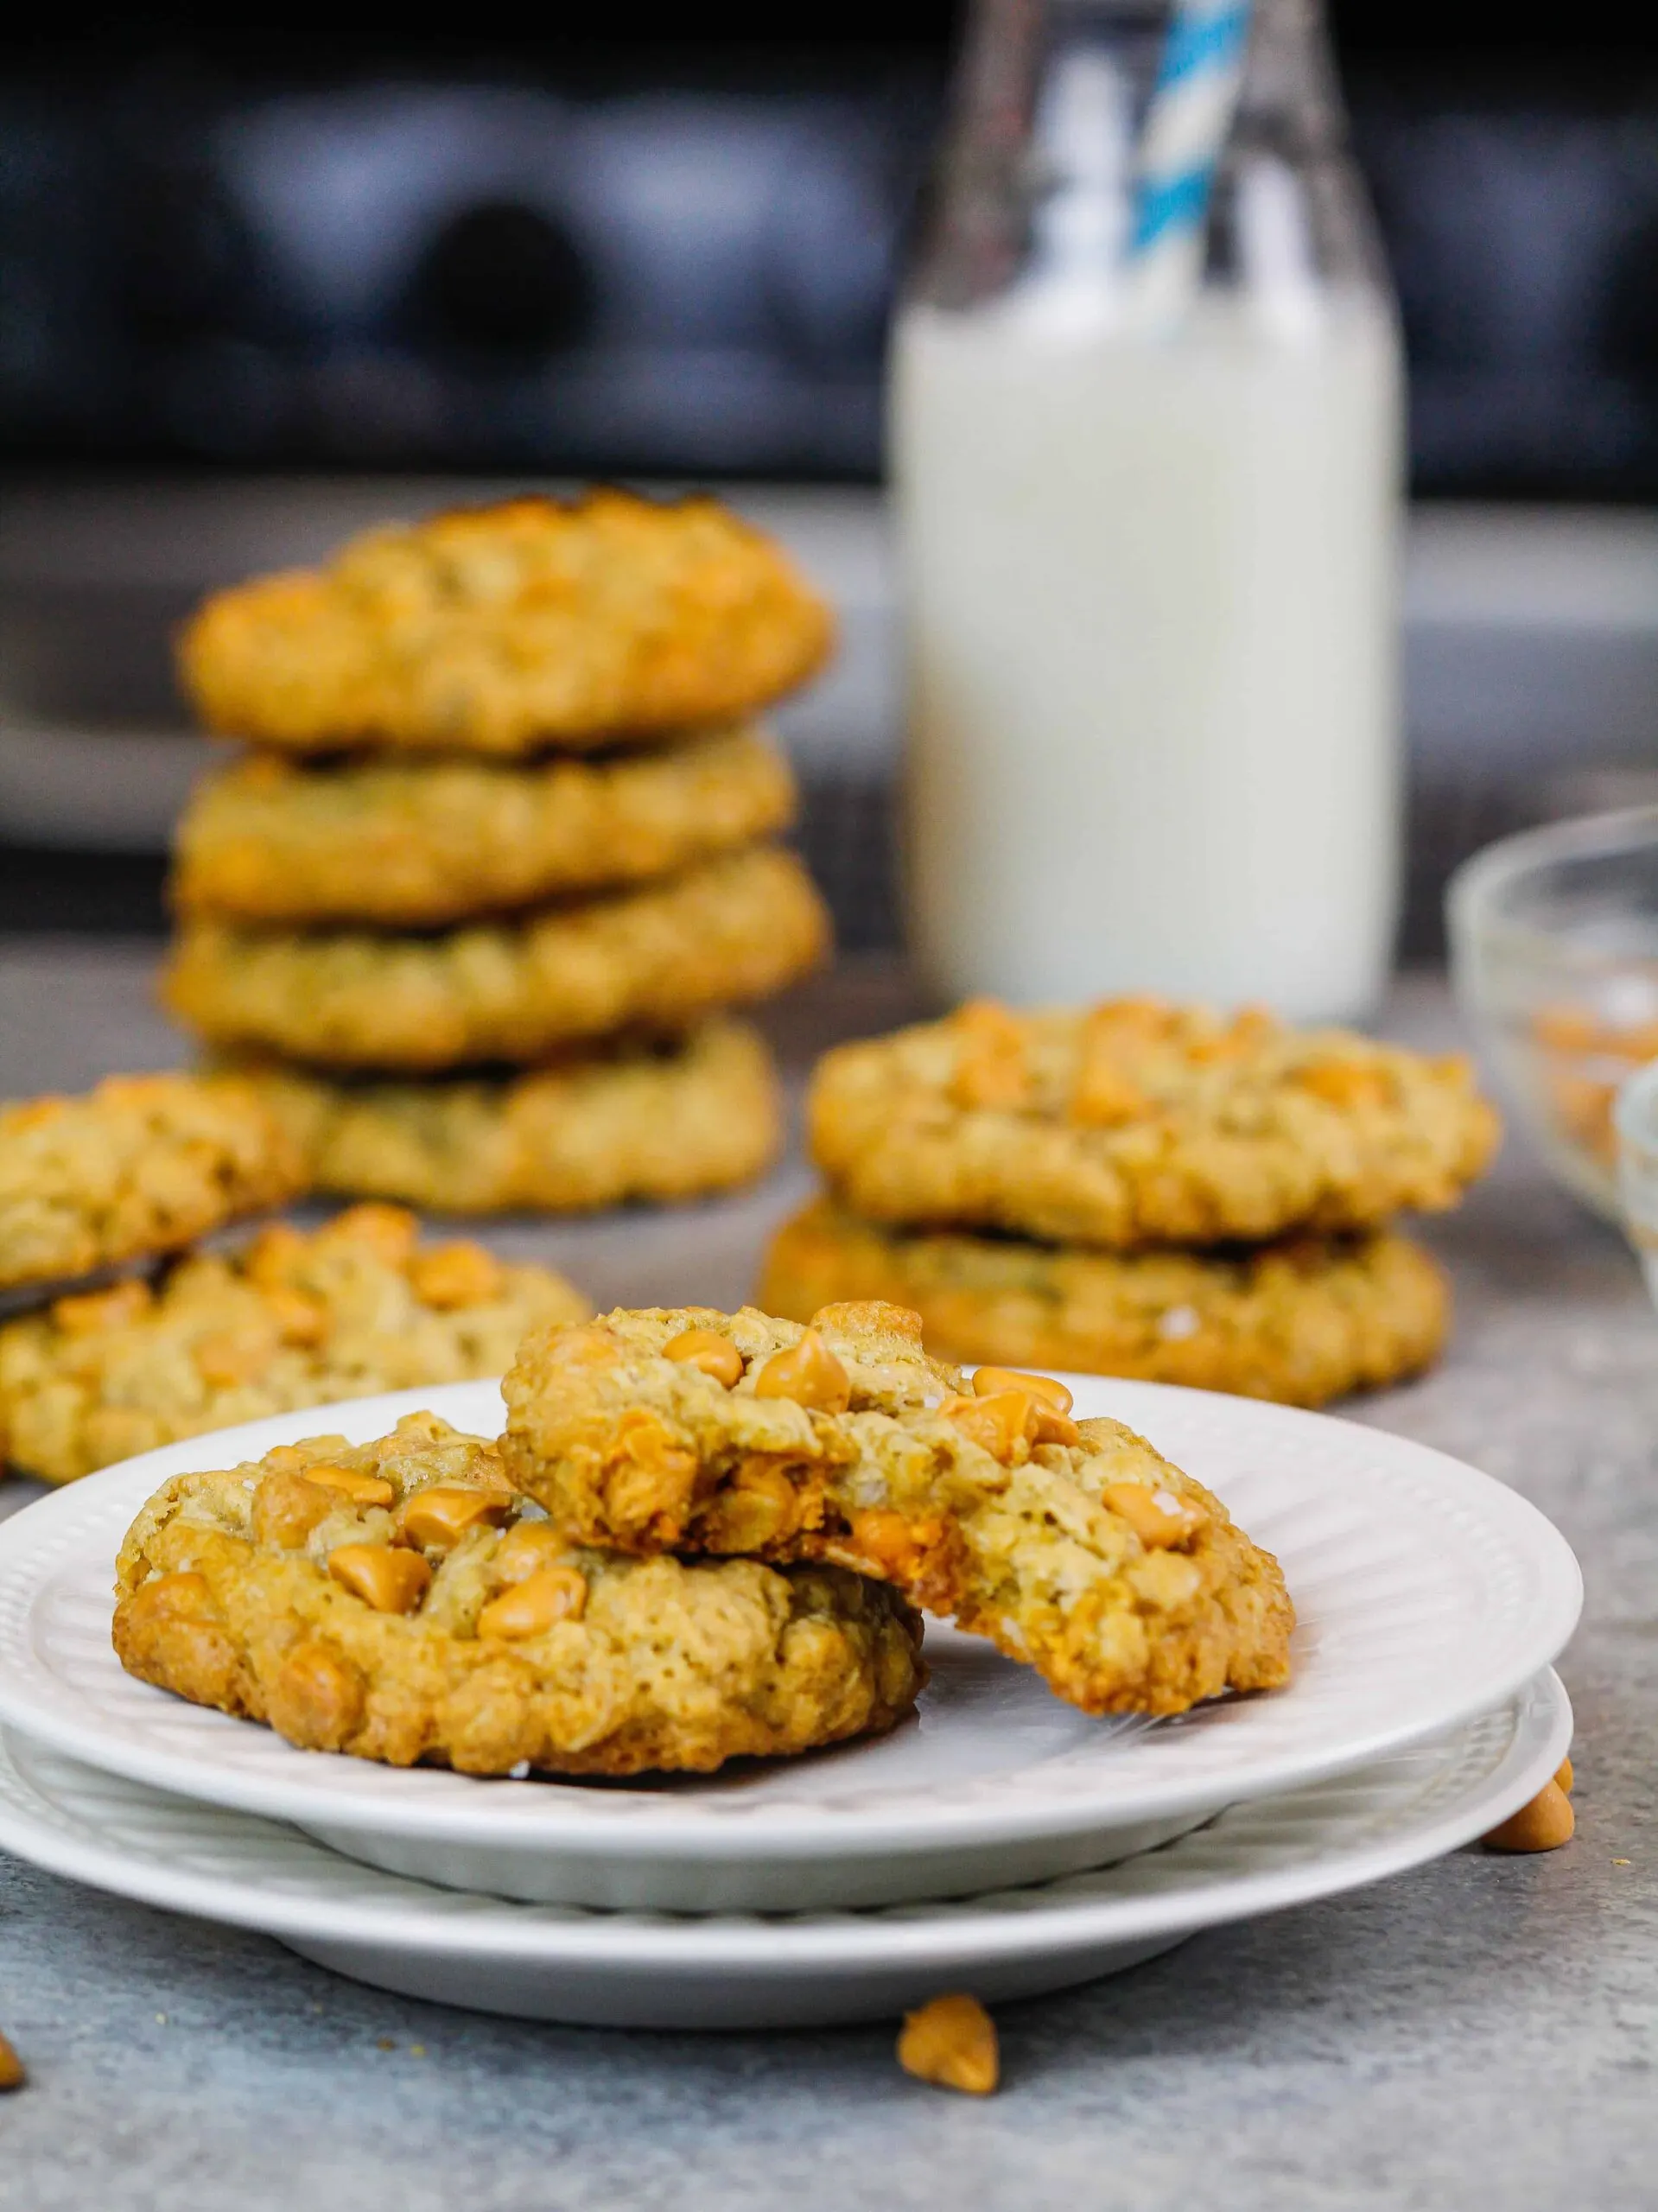 image of oatmeal scotchies on a plate with one cookie bitten into to show how soft and chewy the cookies are